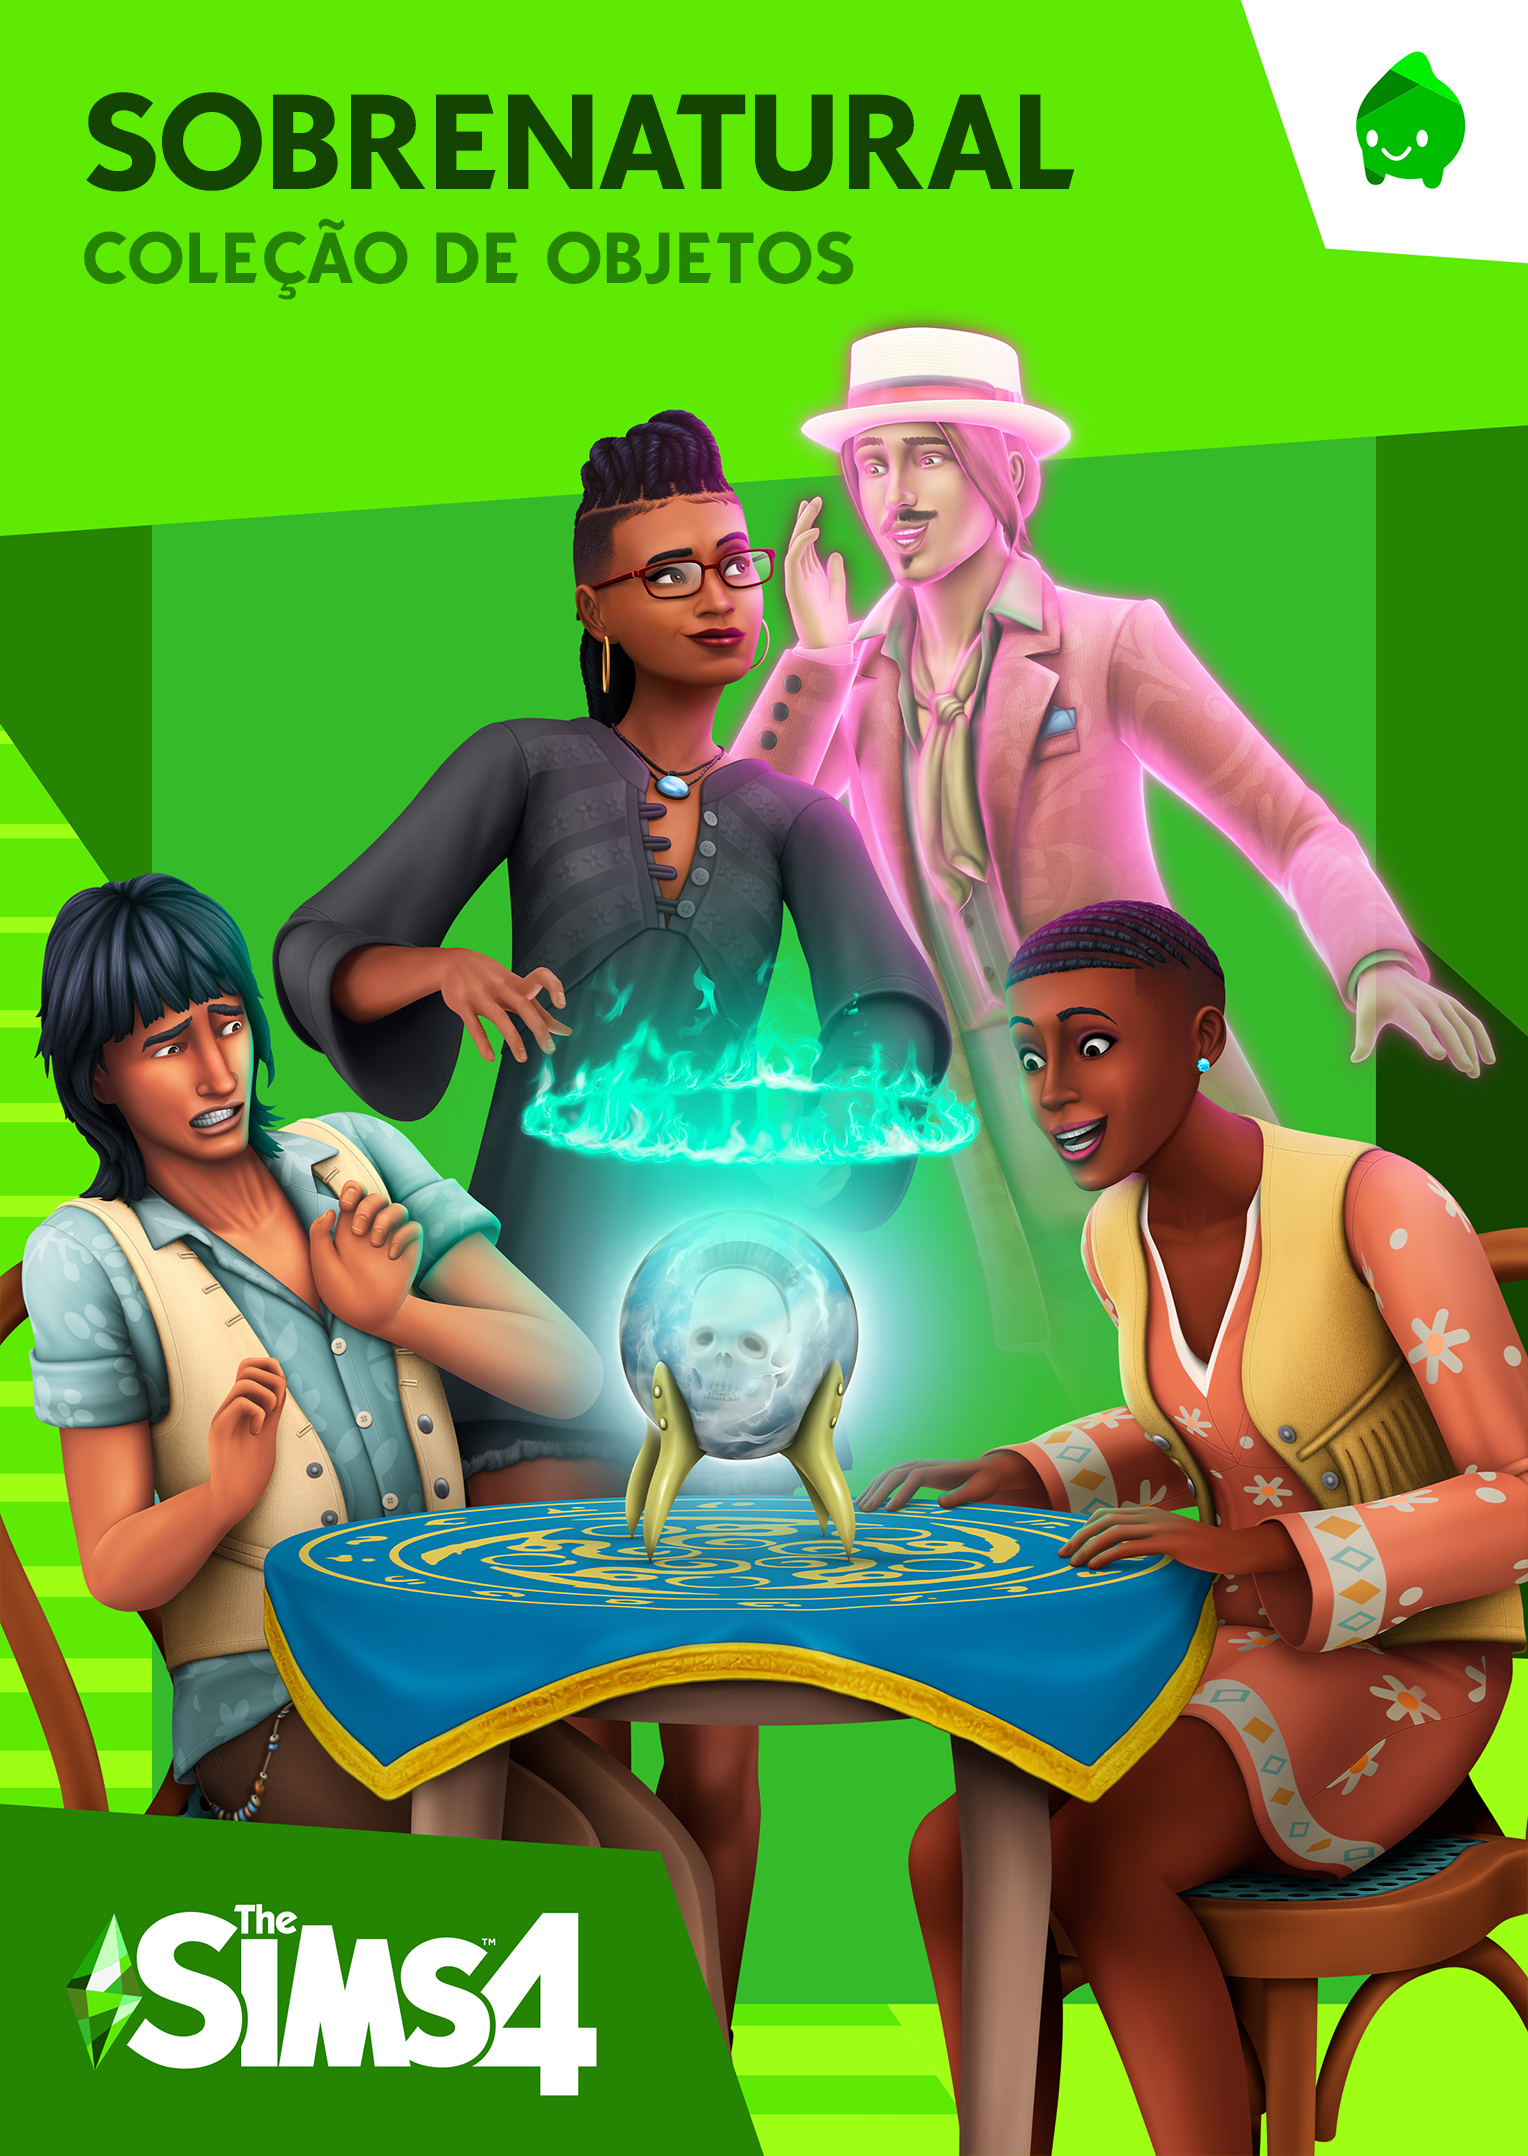 The Sims 4: Noite Chique, The Sims Wiki